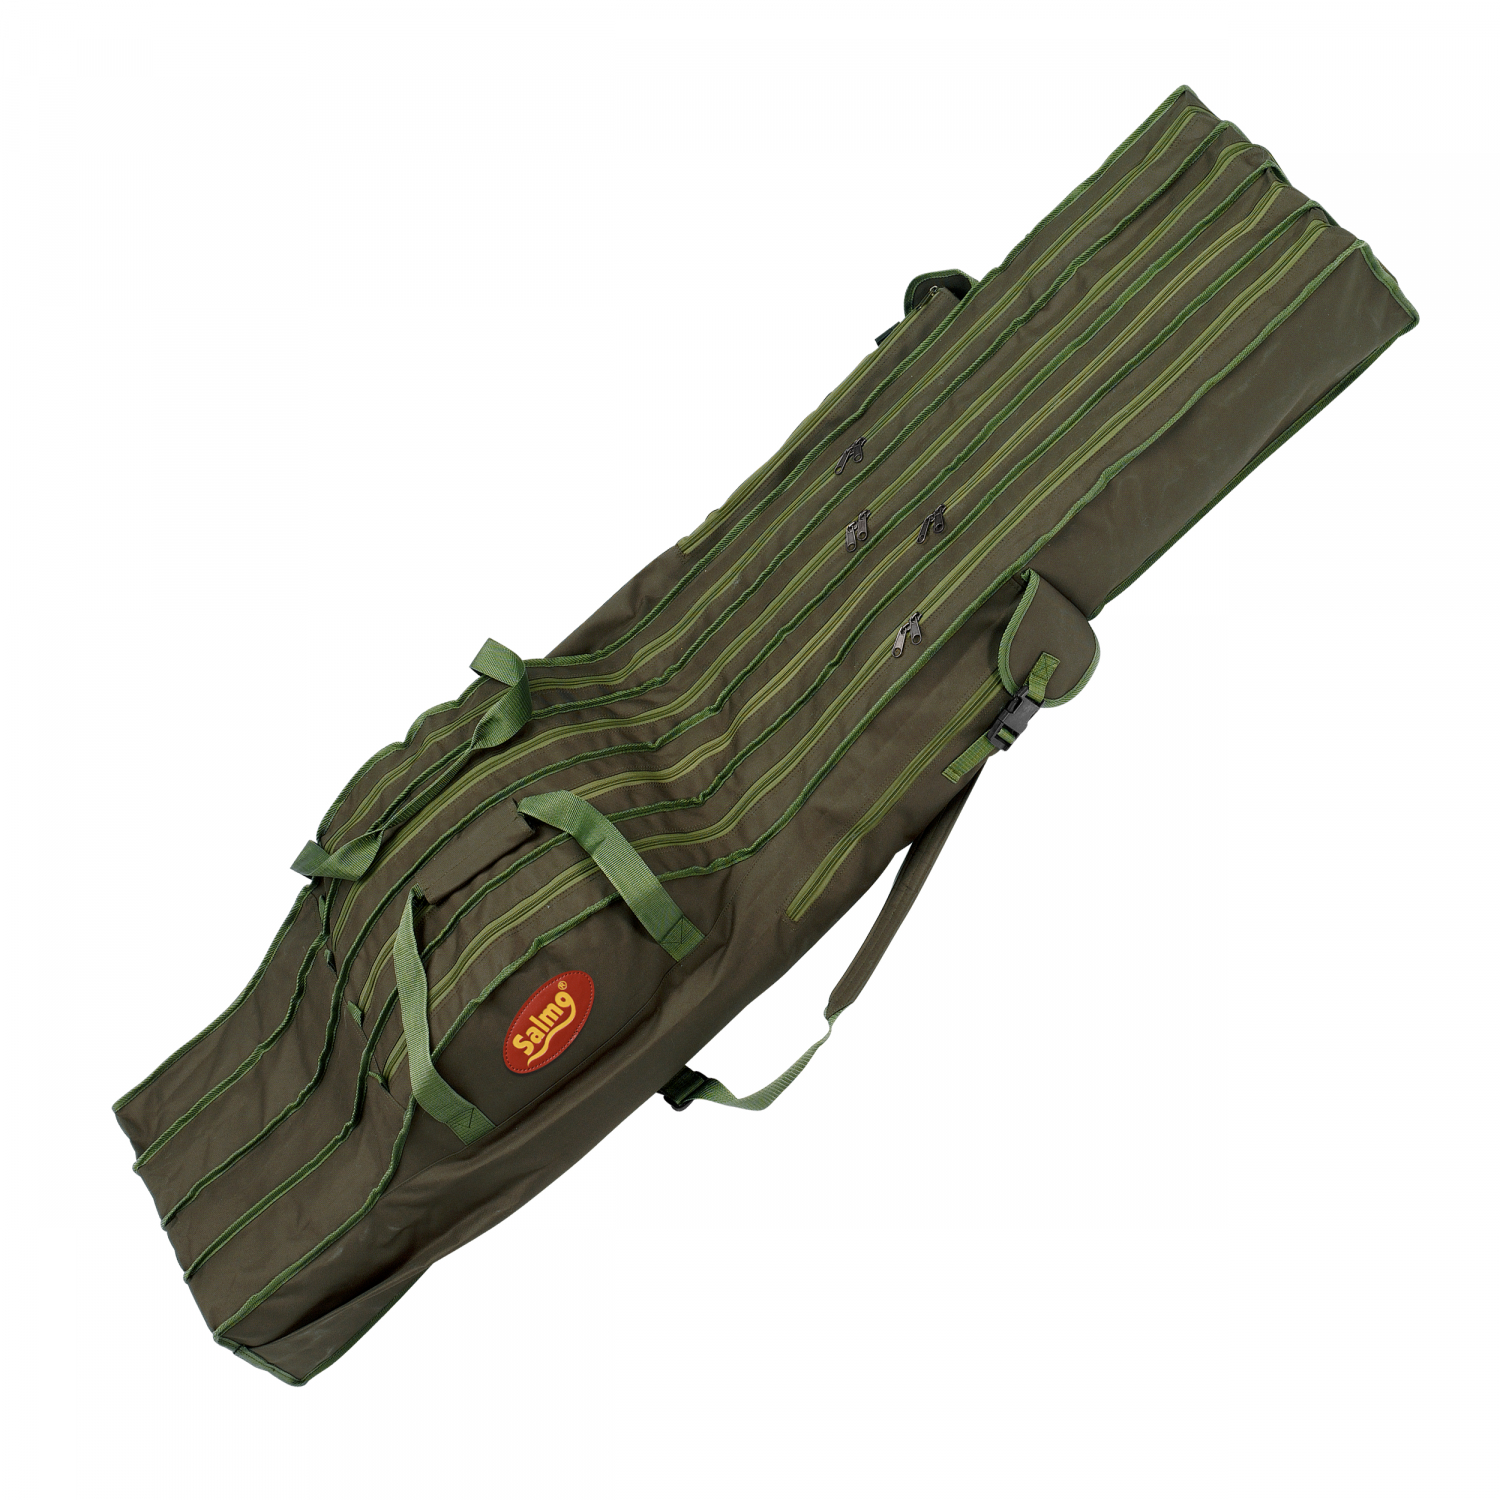 Salmo Rod Bag (XL case) at low prices